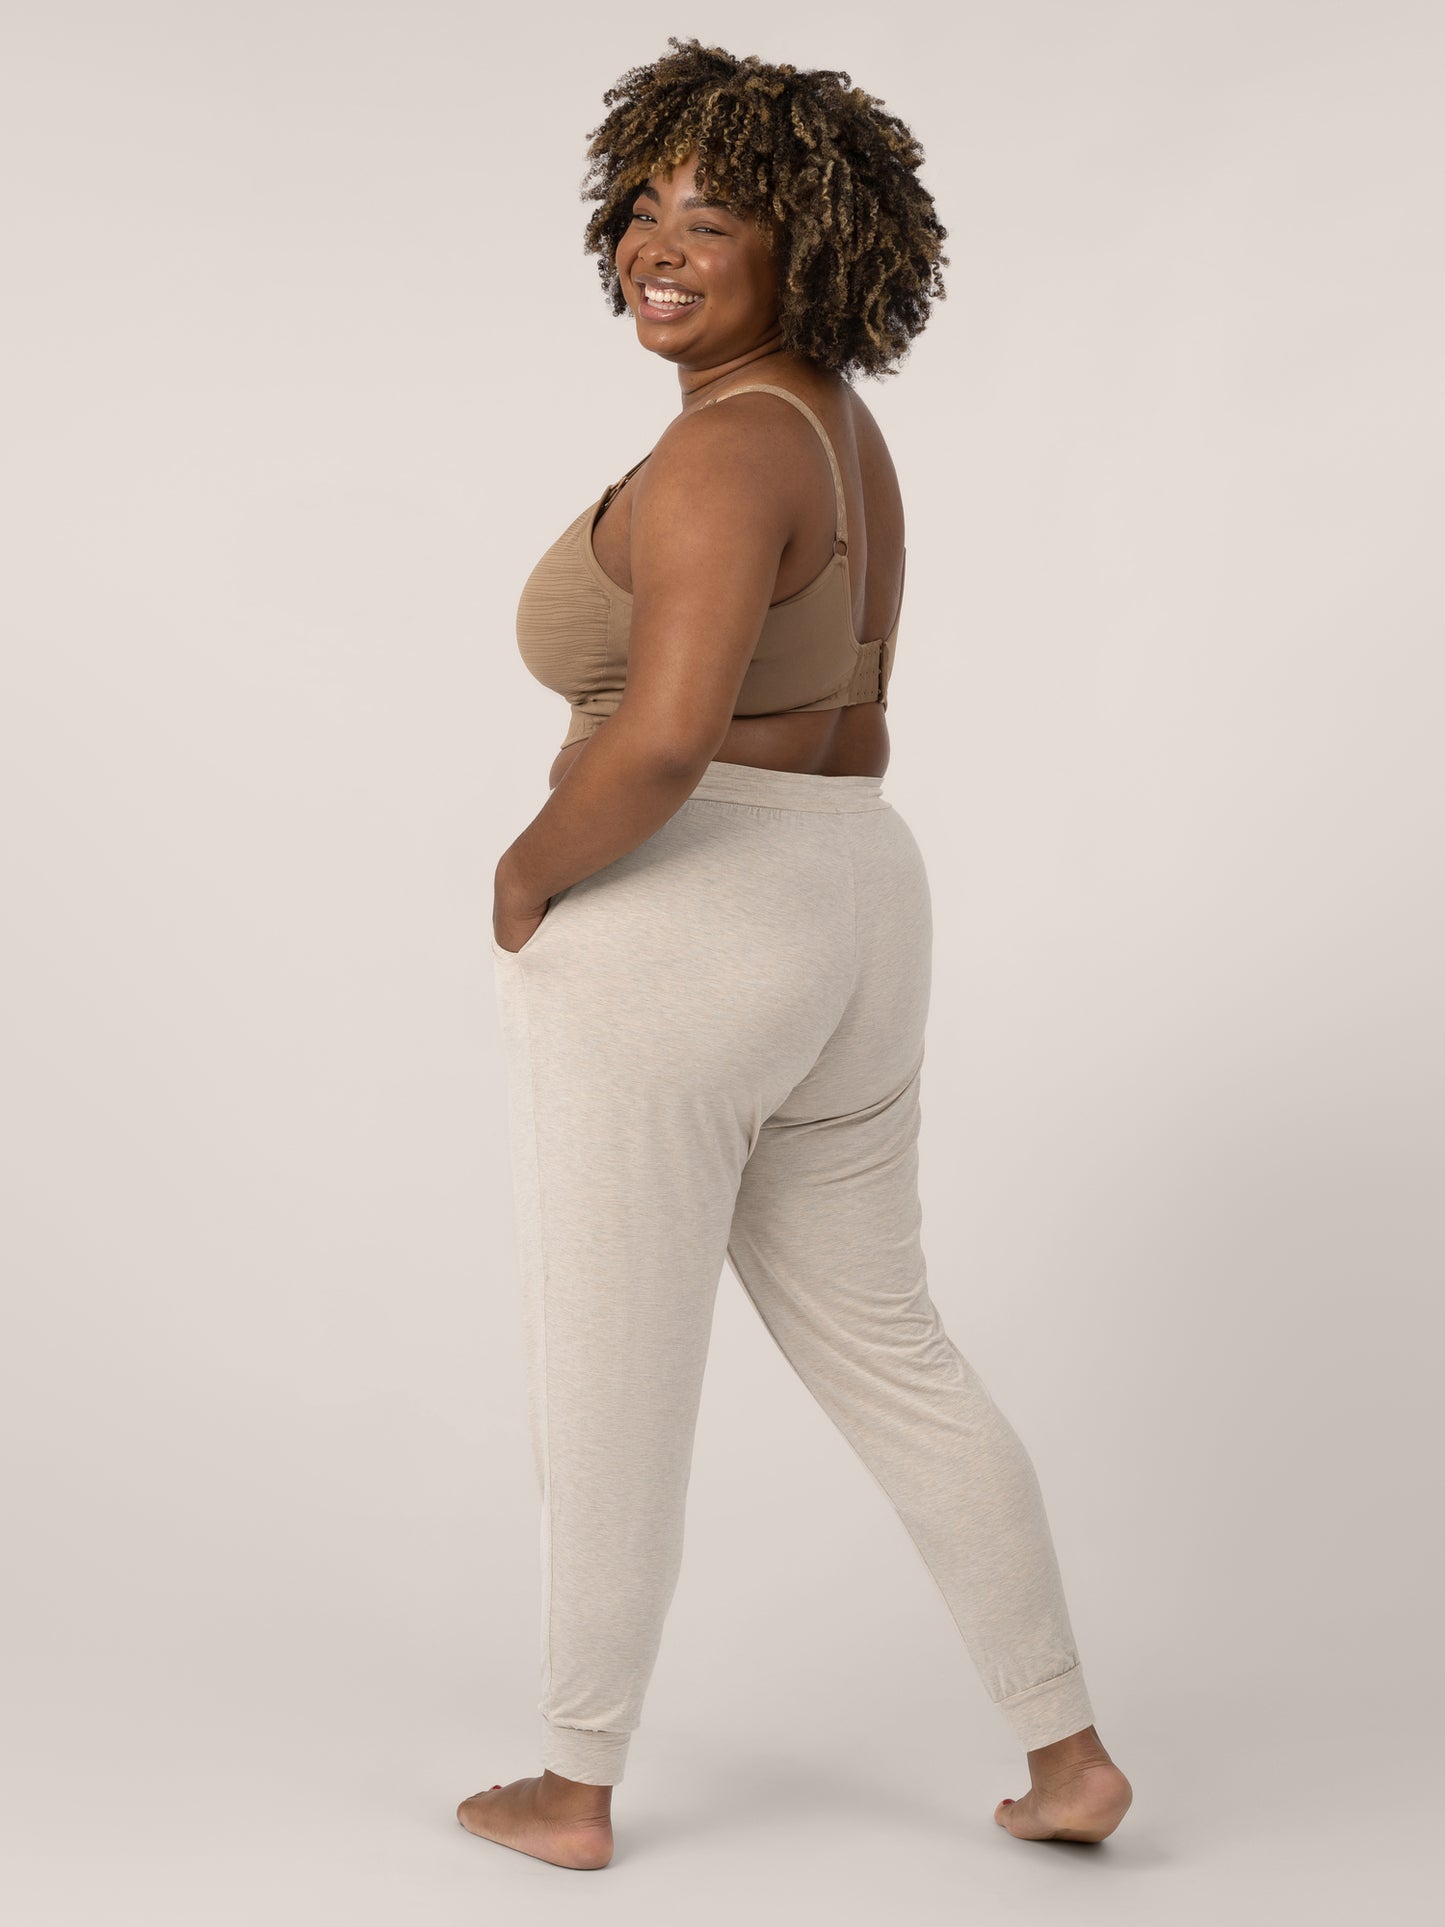 Model wearing the Everyday Lounge Jogger in Oatmeal Heater @model_info:Skye is 5'7" and is wearing an X-Large Long.